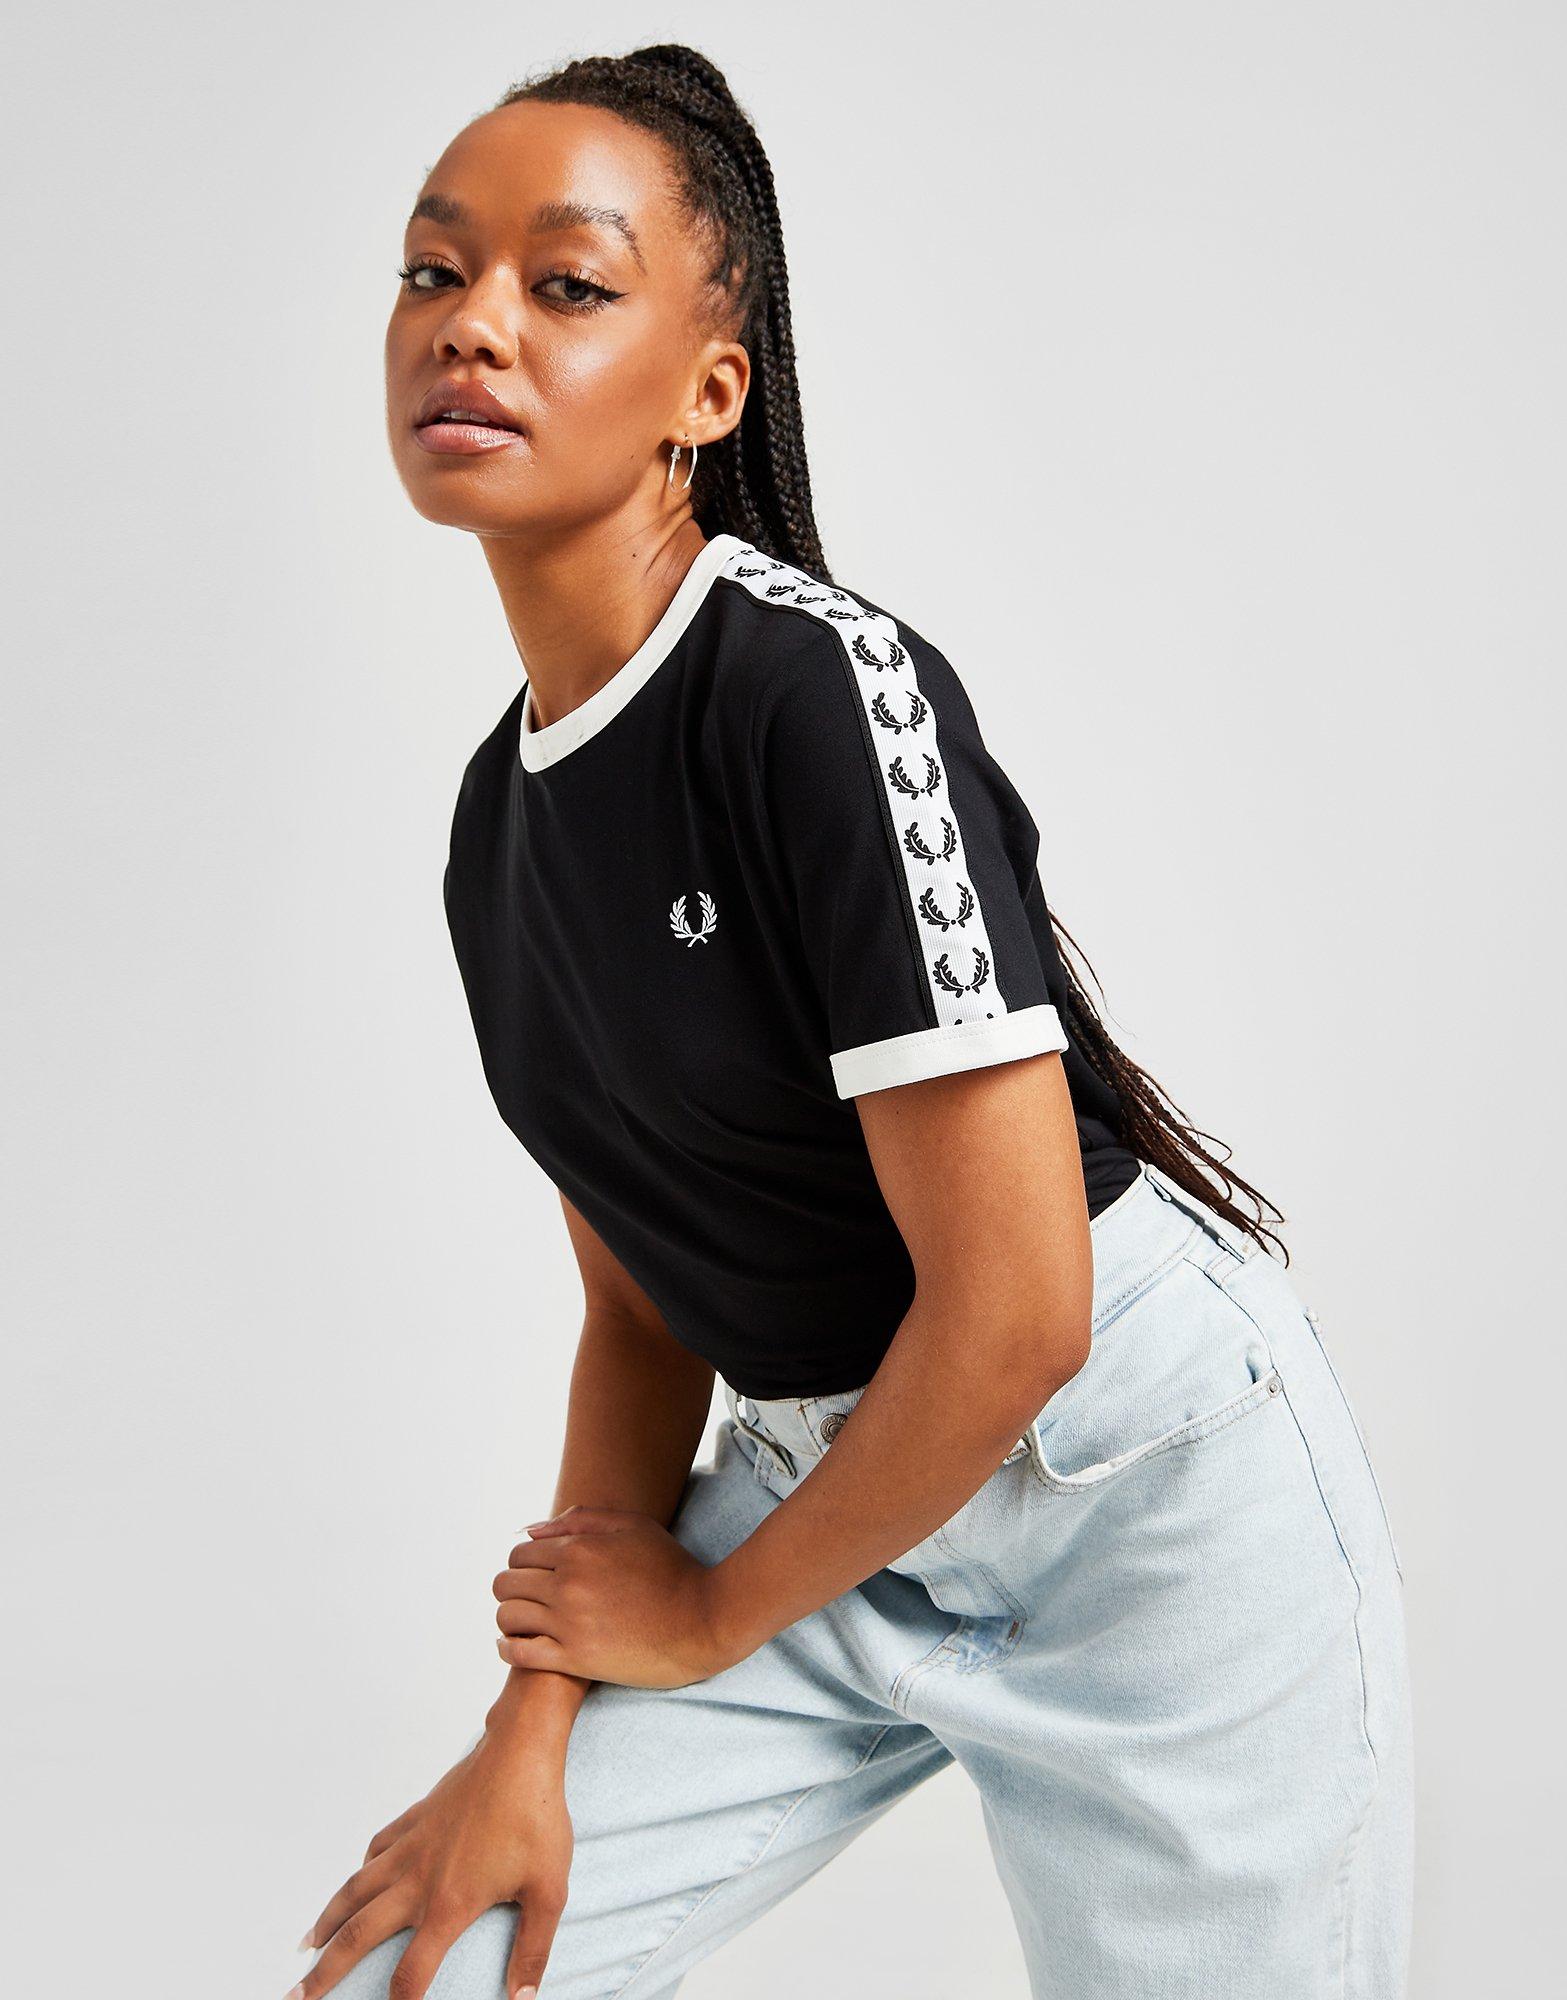 fred perry girl shirt